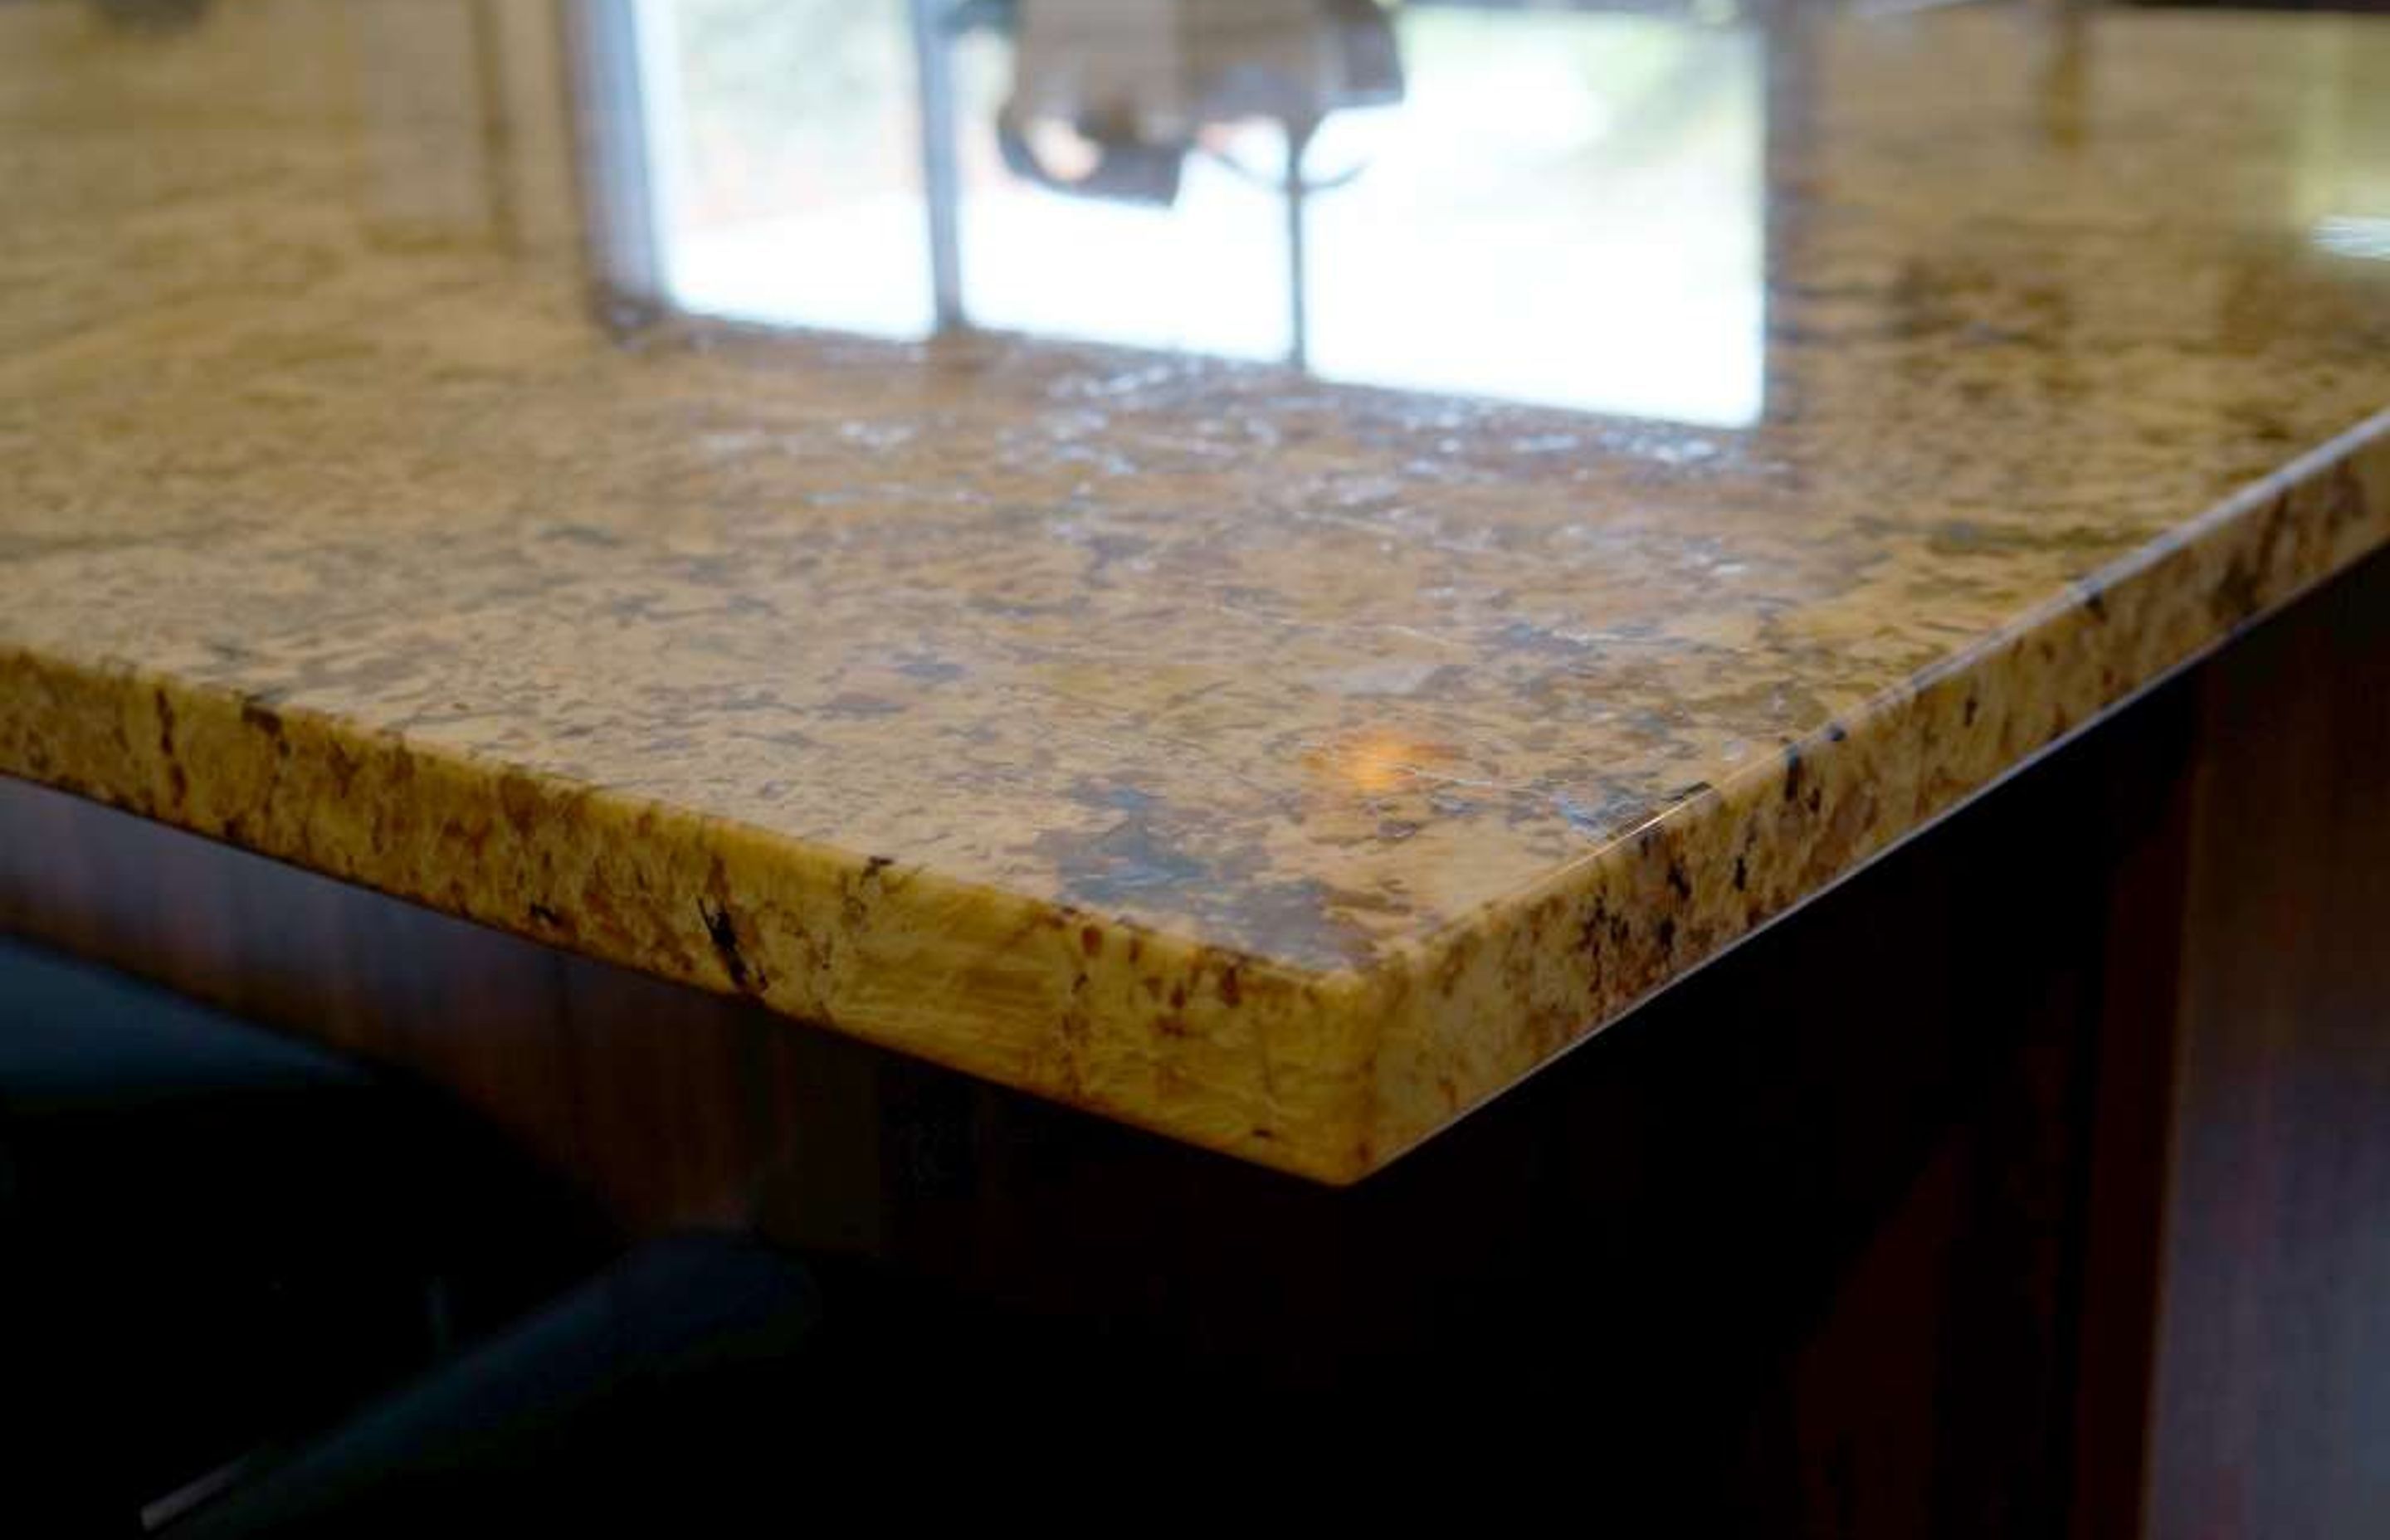 Custom built stone engineered countertop used for Mary’s kitchen. We made this engineered stone look like pattered granite with a shiny sheen. The pattern chosen above is called Autumn leaf and like its name has yellow and mustard undertones which complem